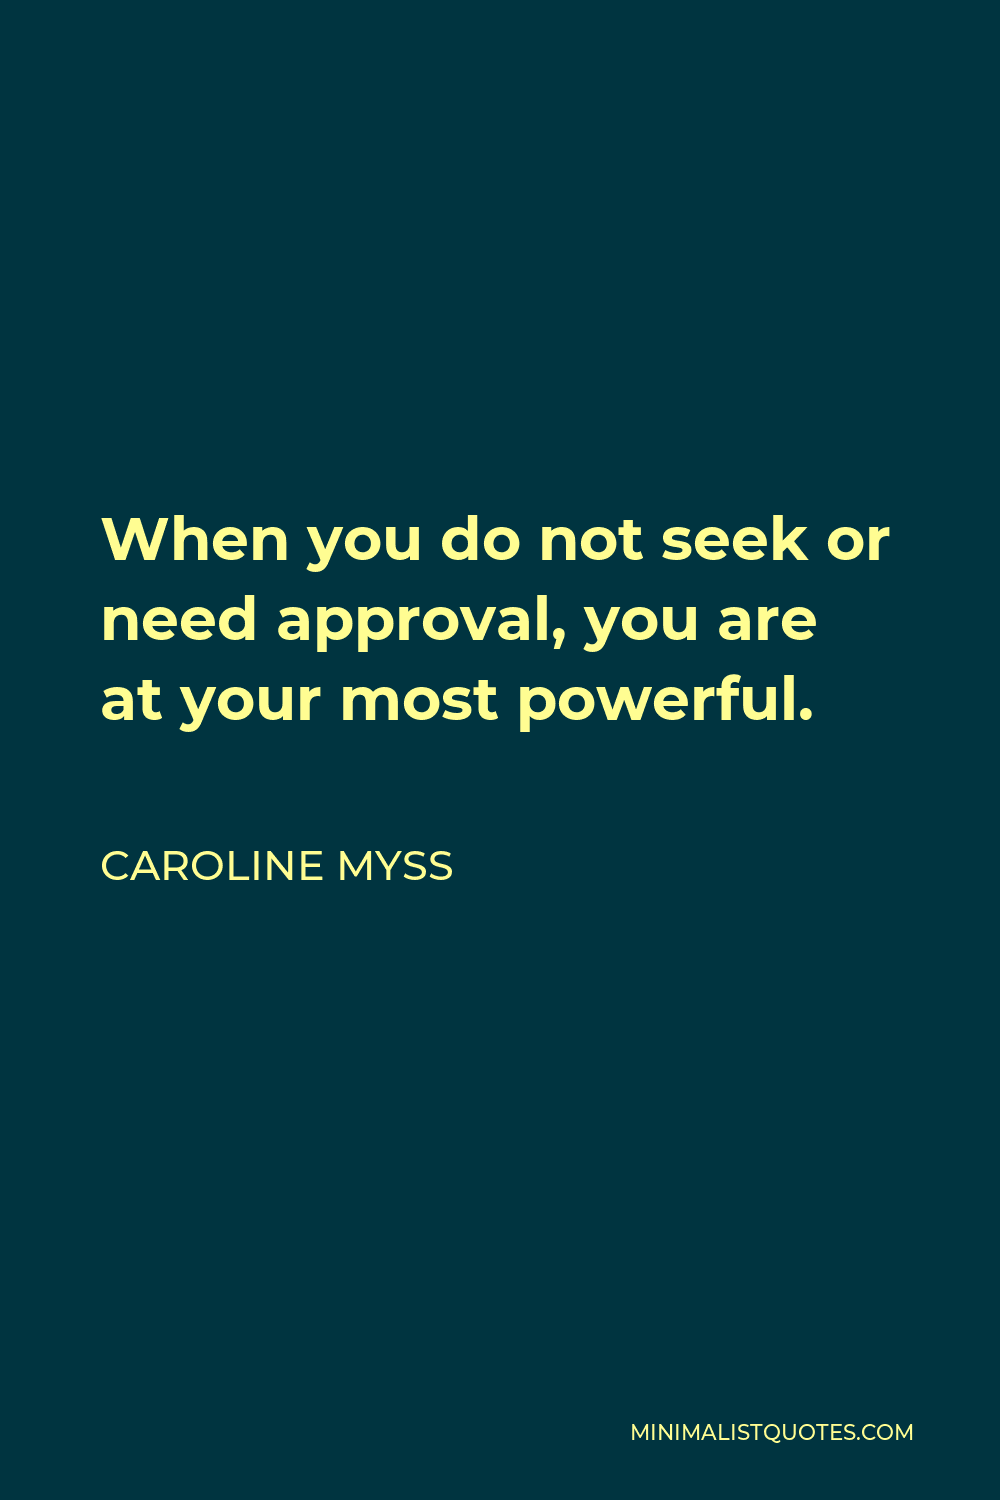 Caroline Myss Quote - When you do not seek or need approval, you are at your most powerful.